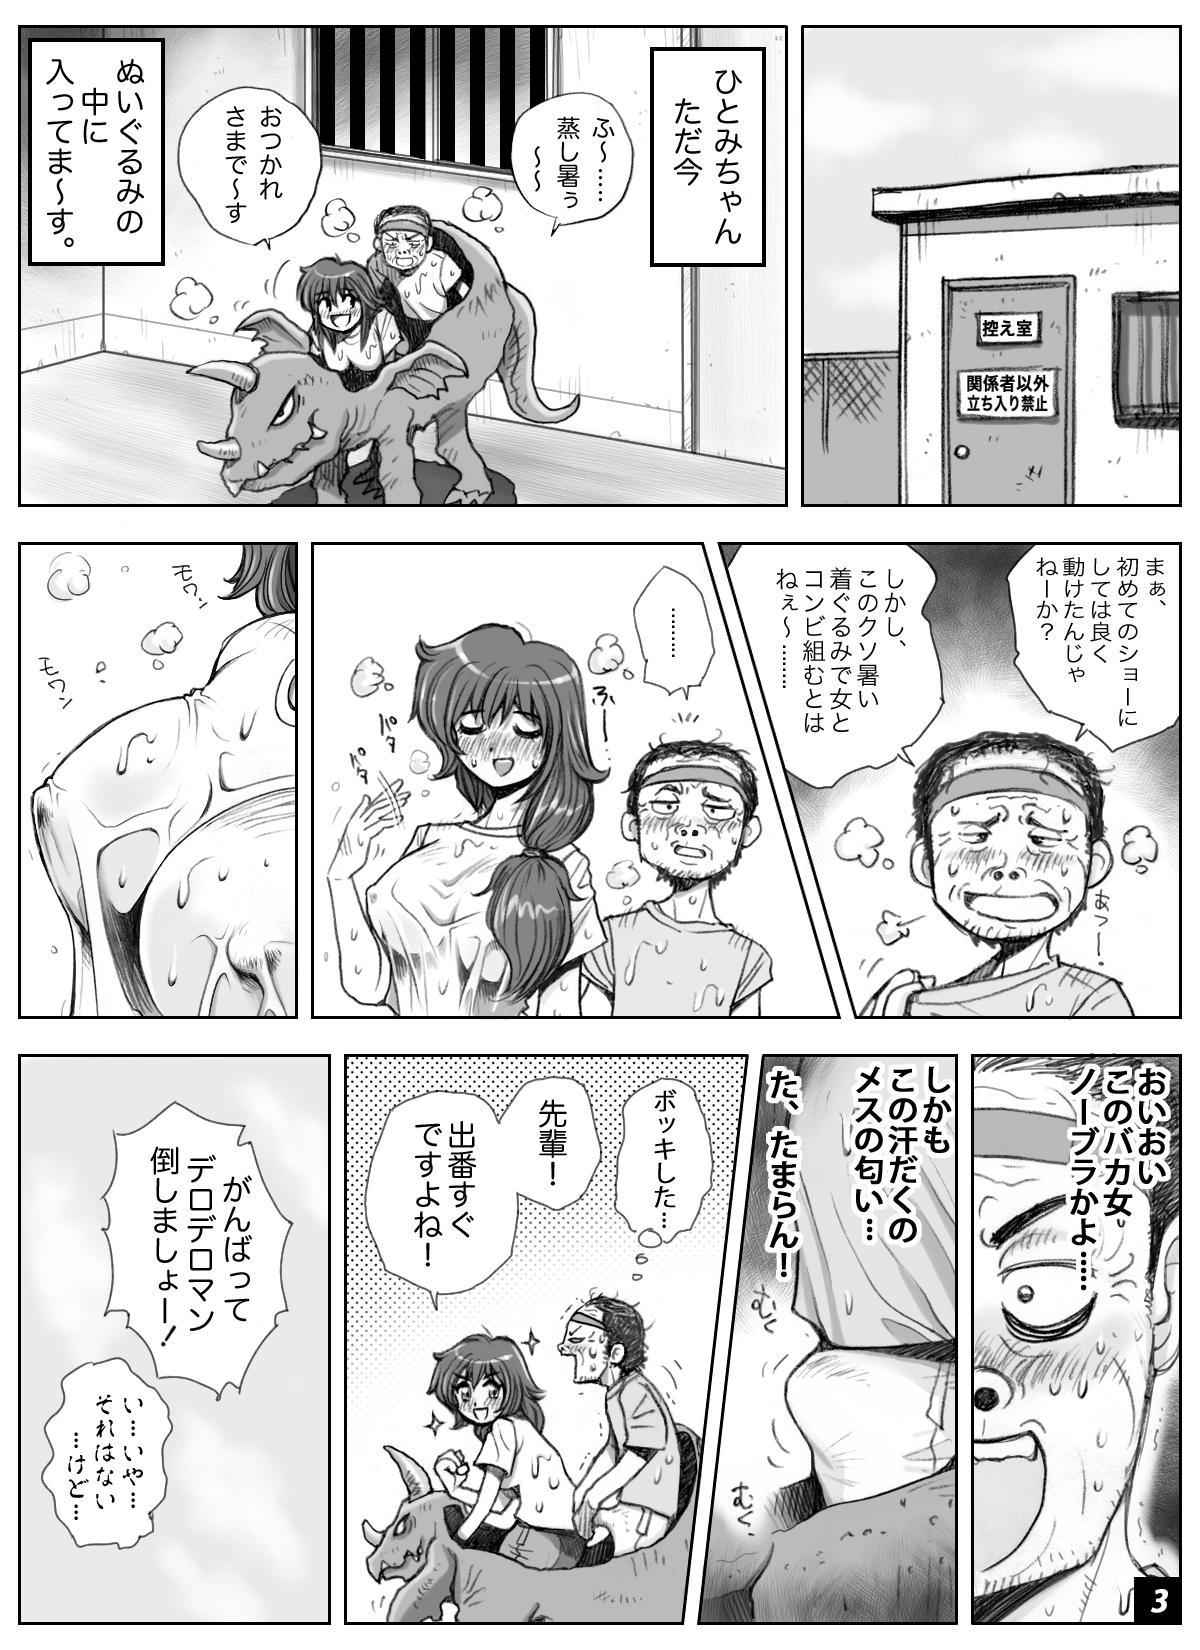 Amateur Porn ikeikeフリーター ひとみちゃん Vol.6 Virtual - Page 3